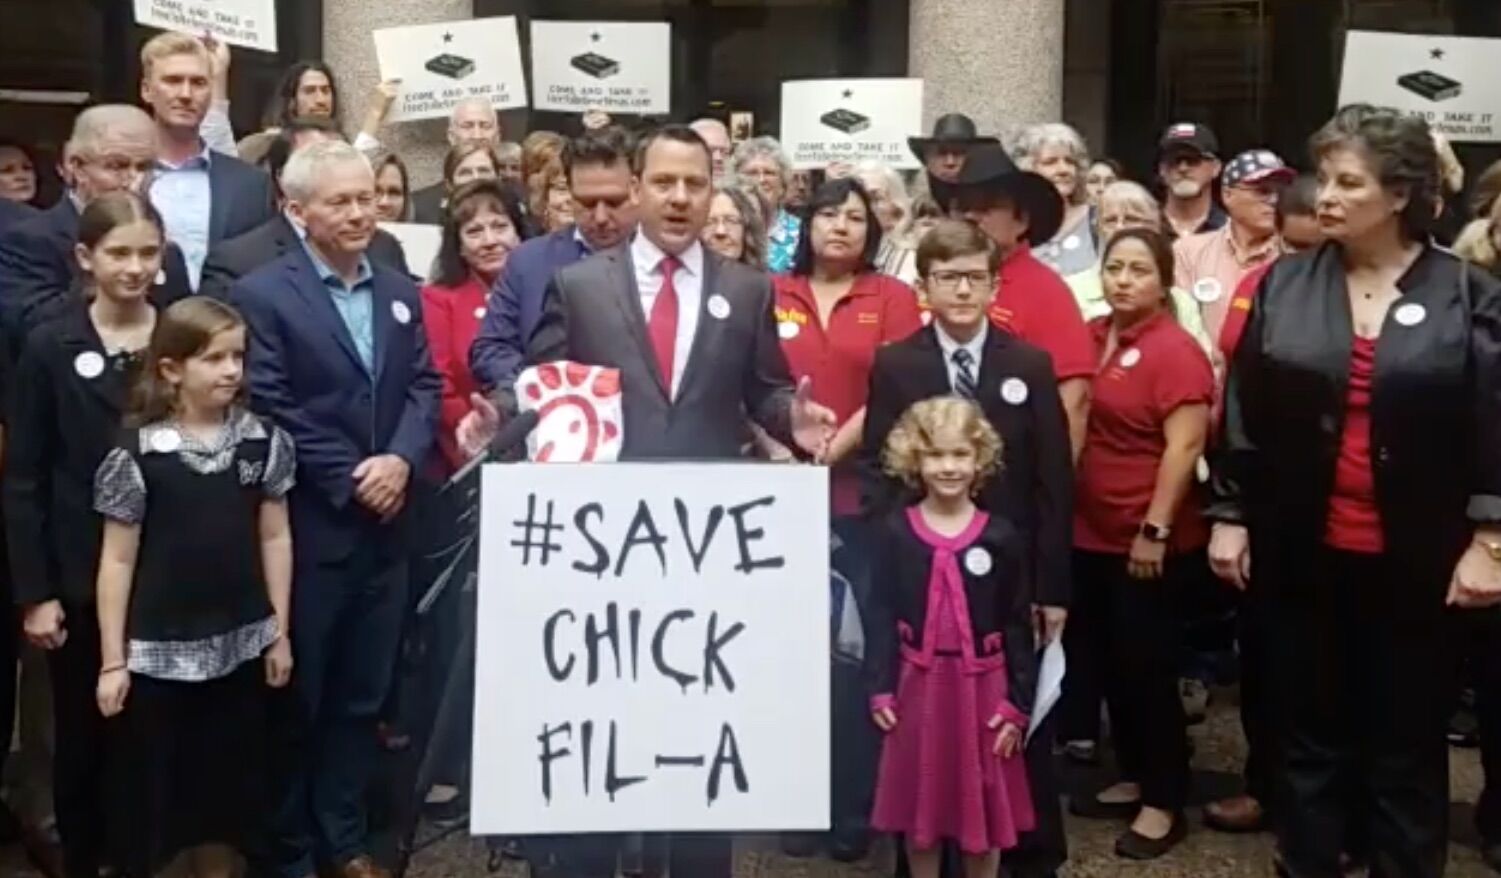 Members of the conservative Christian group Texas Values used "Save Chick-fil-A Day" to advocate for legal discrimination against LGBTQ people.